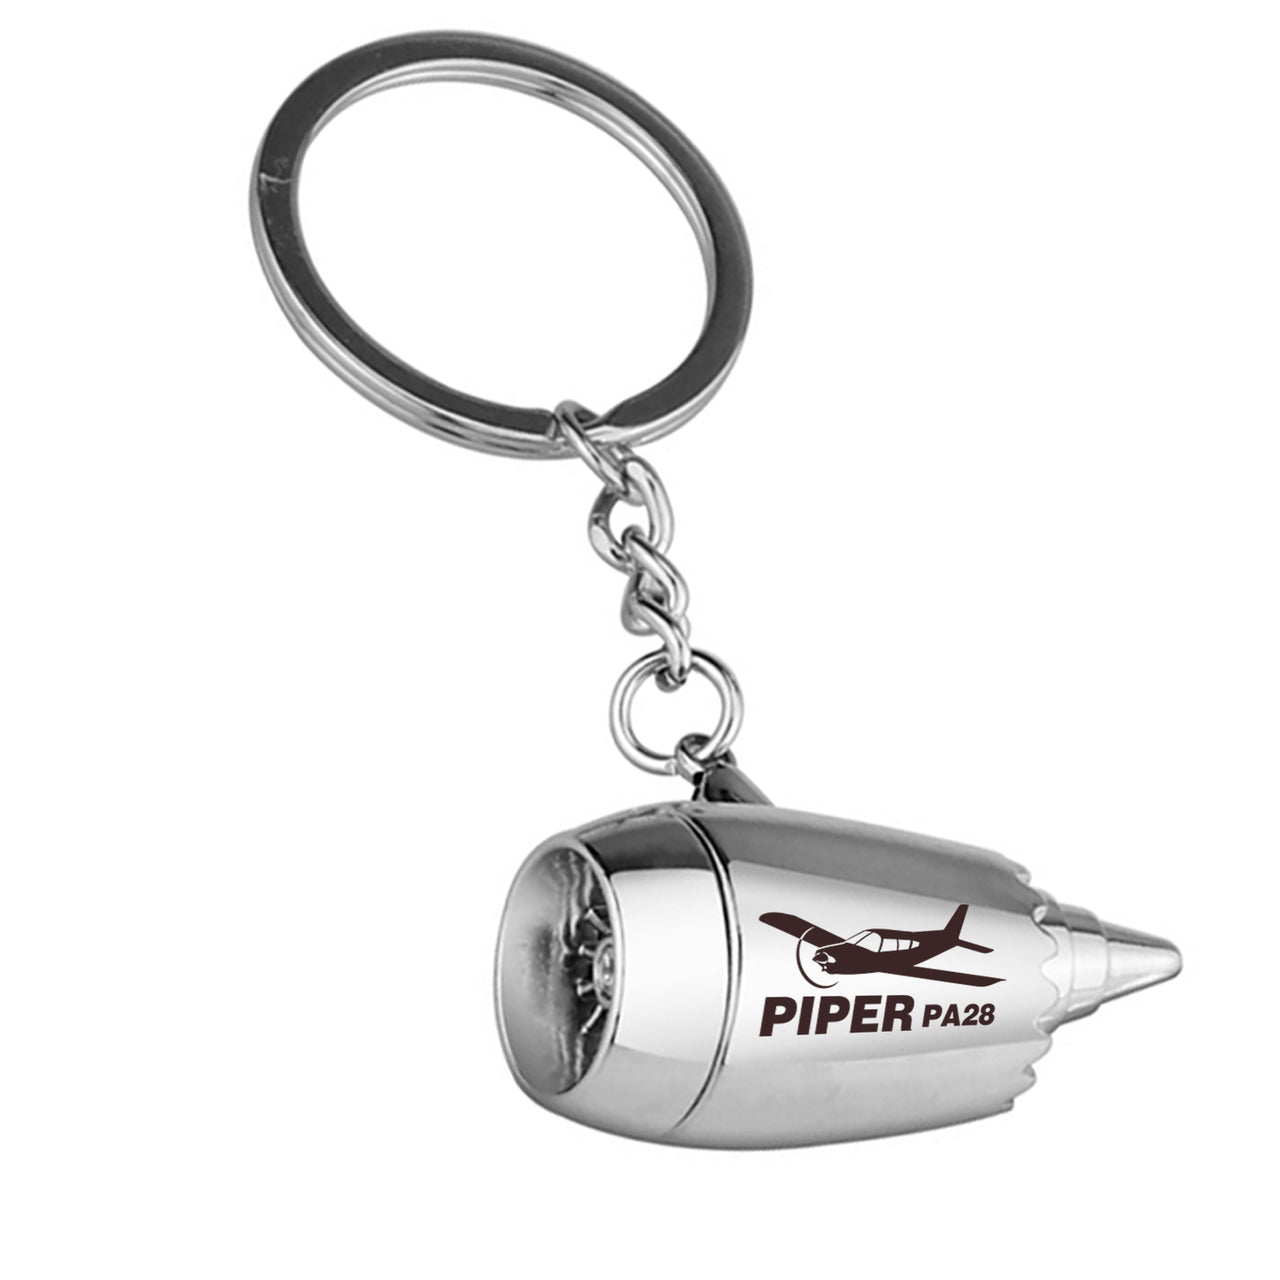 The Piper PA28 Designed Airplane Jet Engine Shaped Key Chain